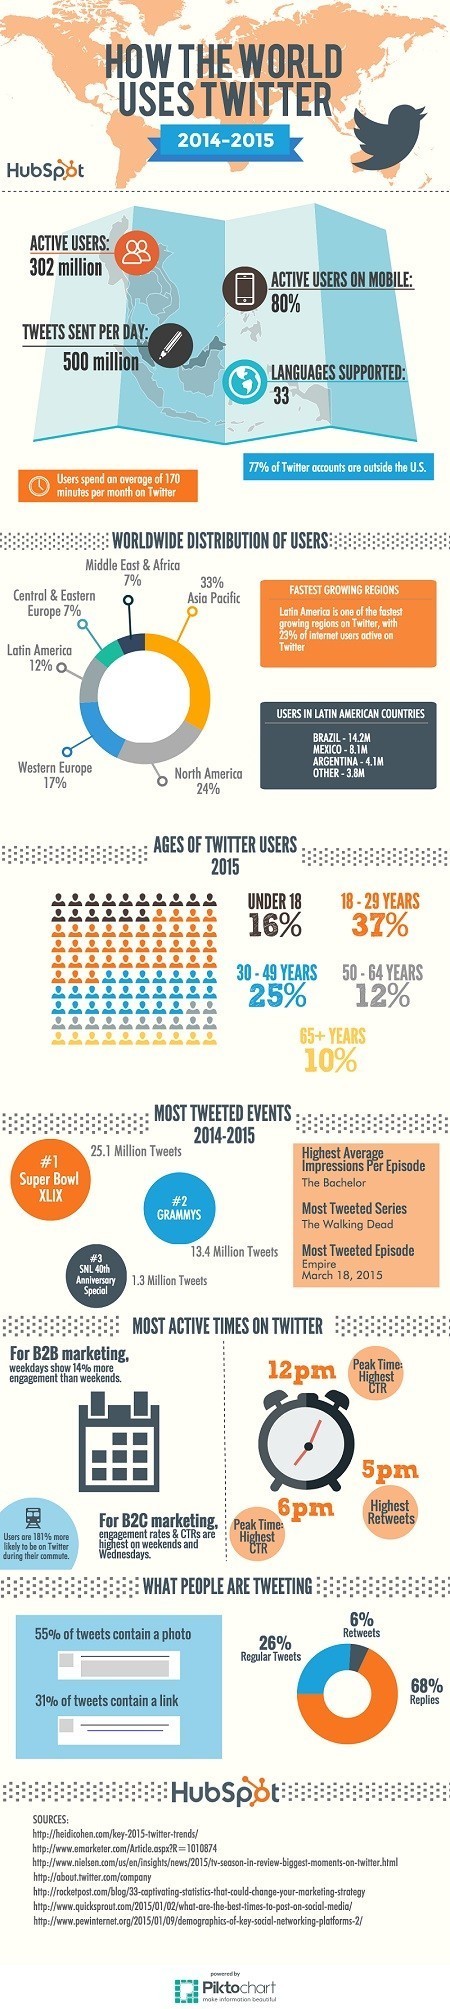 How the World Uses Twitter [Infographic] | Content Marketing & Content Strategy | Scoop.it